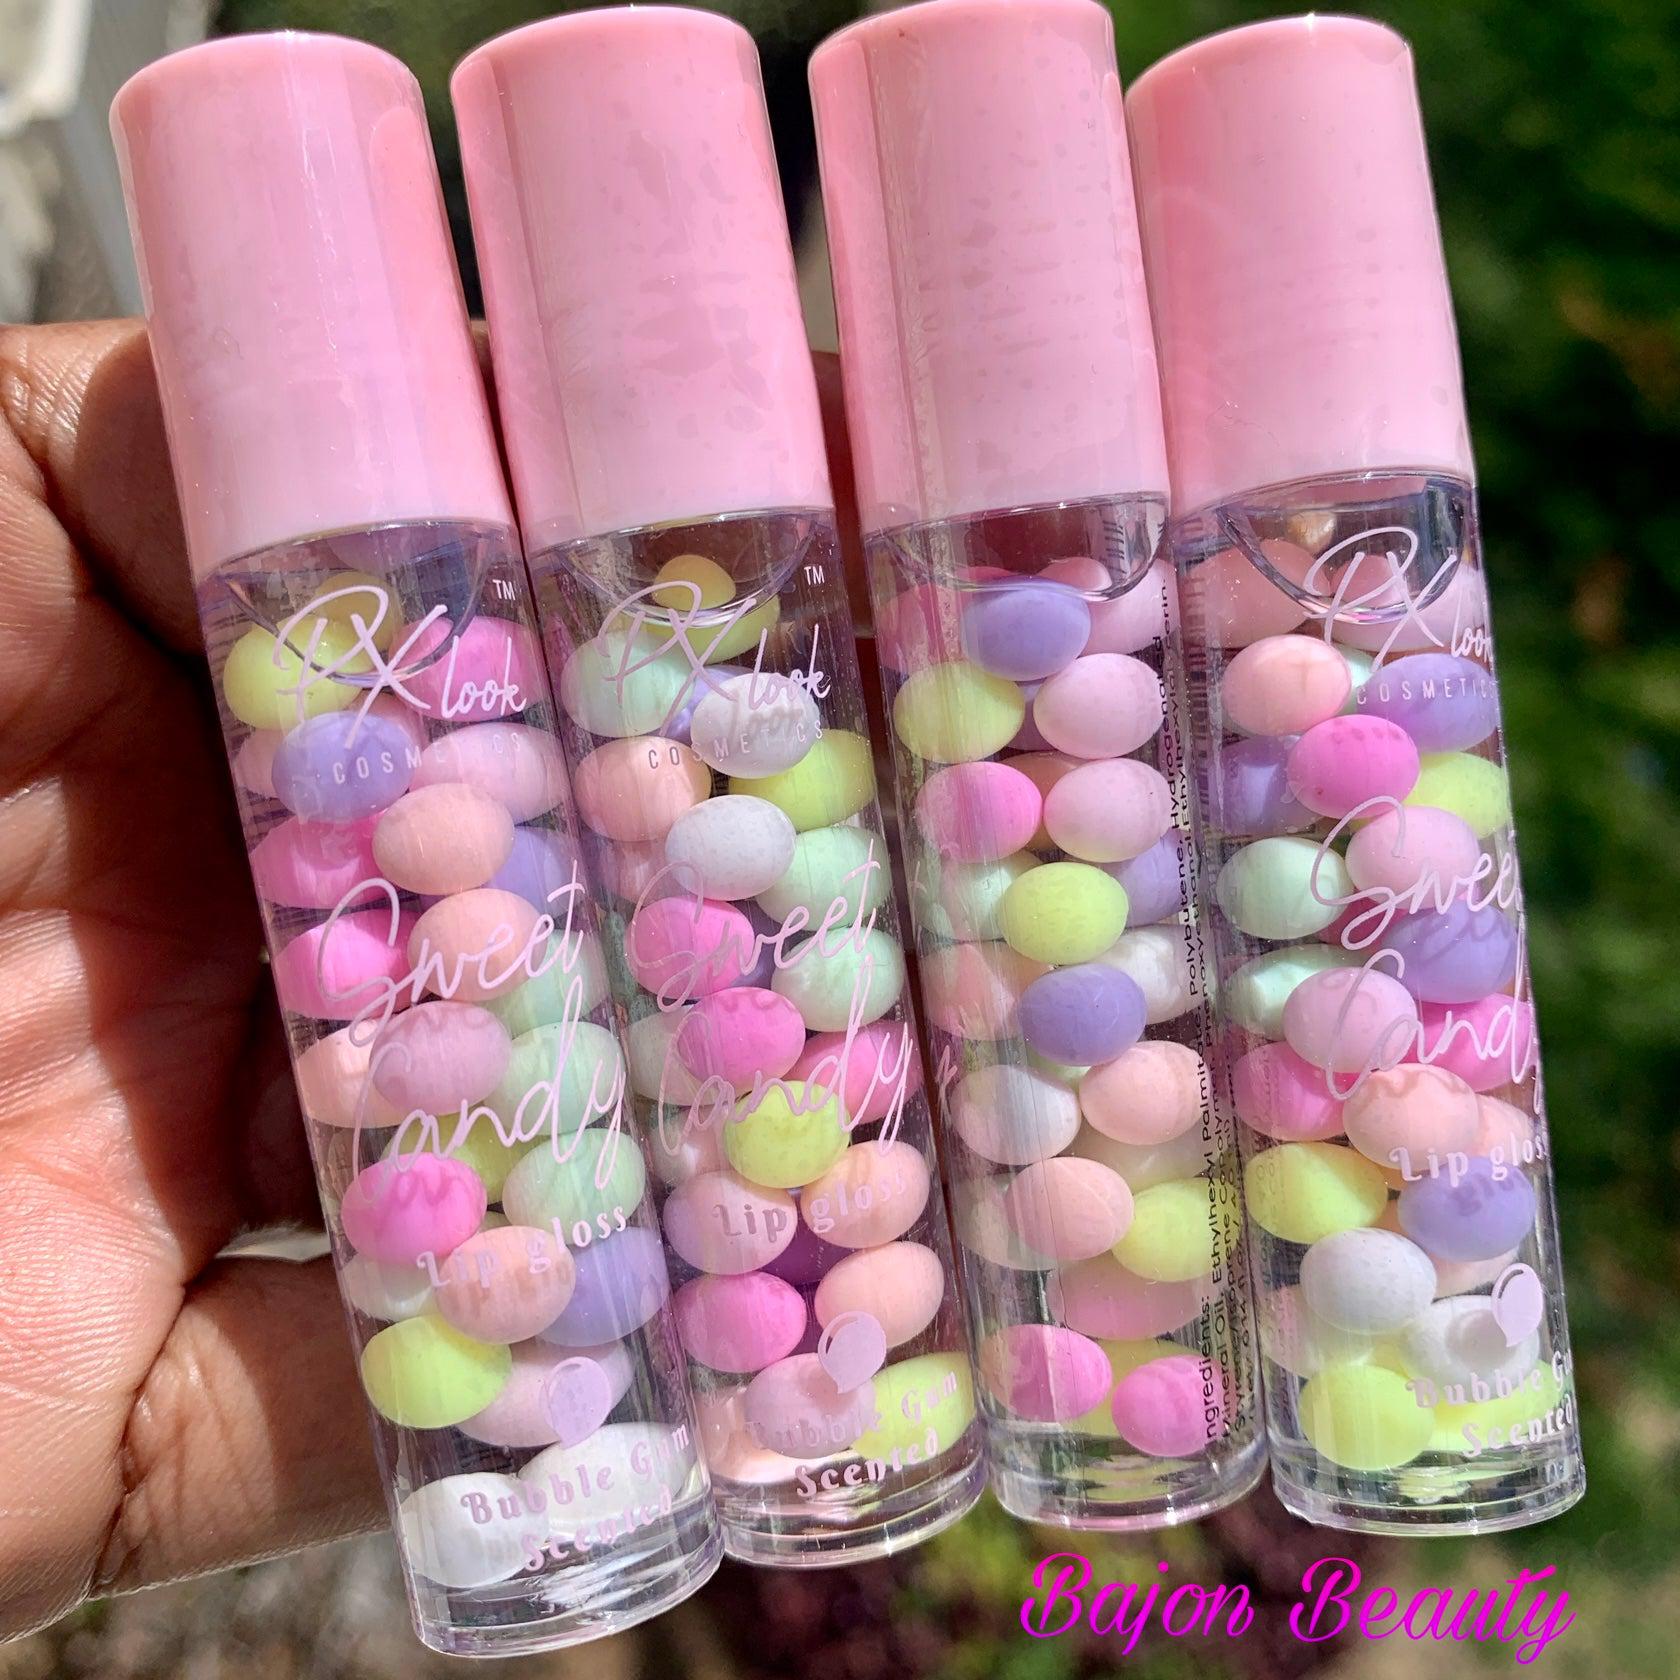 Pxlook Sweet Candy  Lipgloss